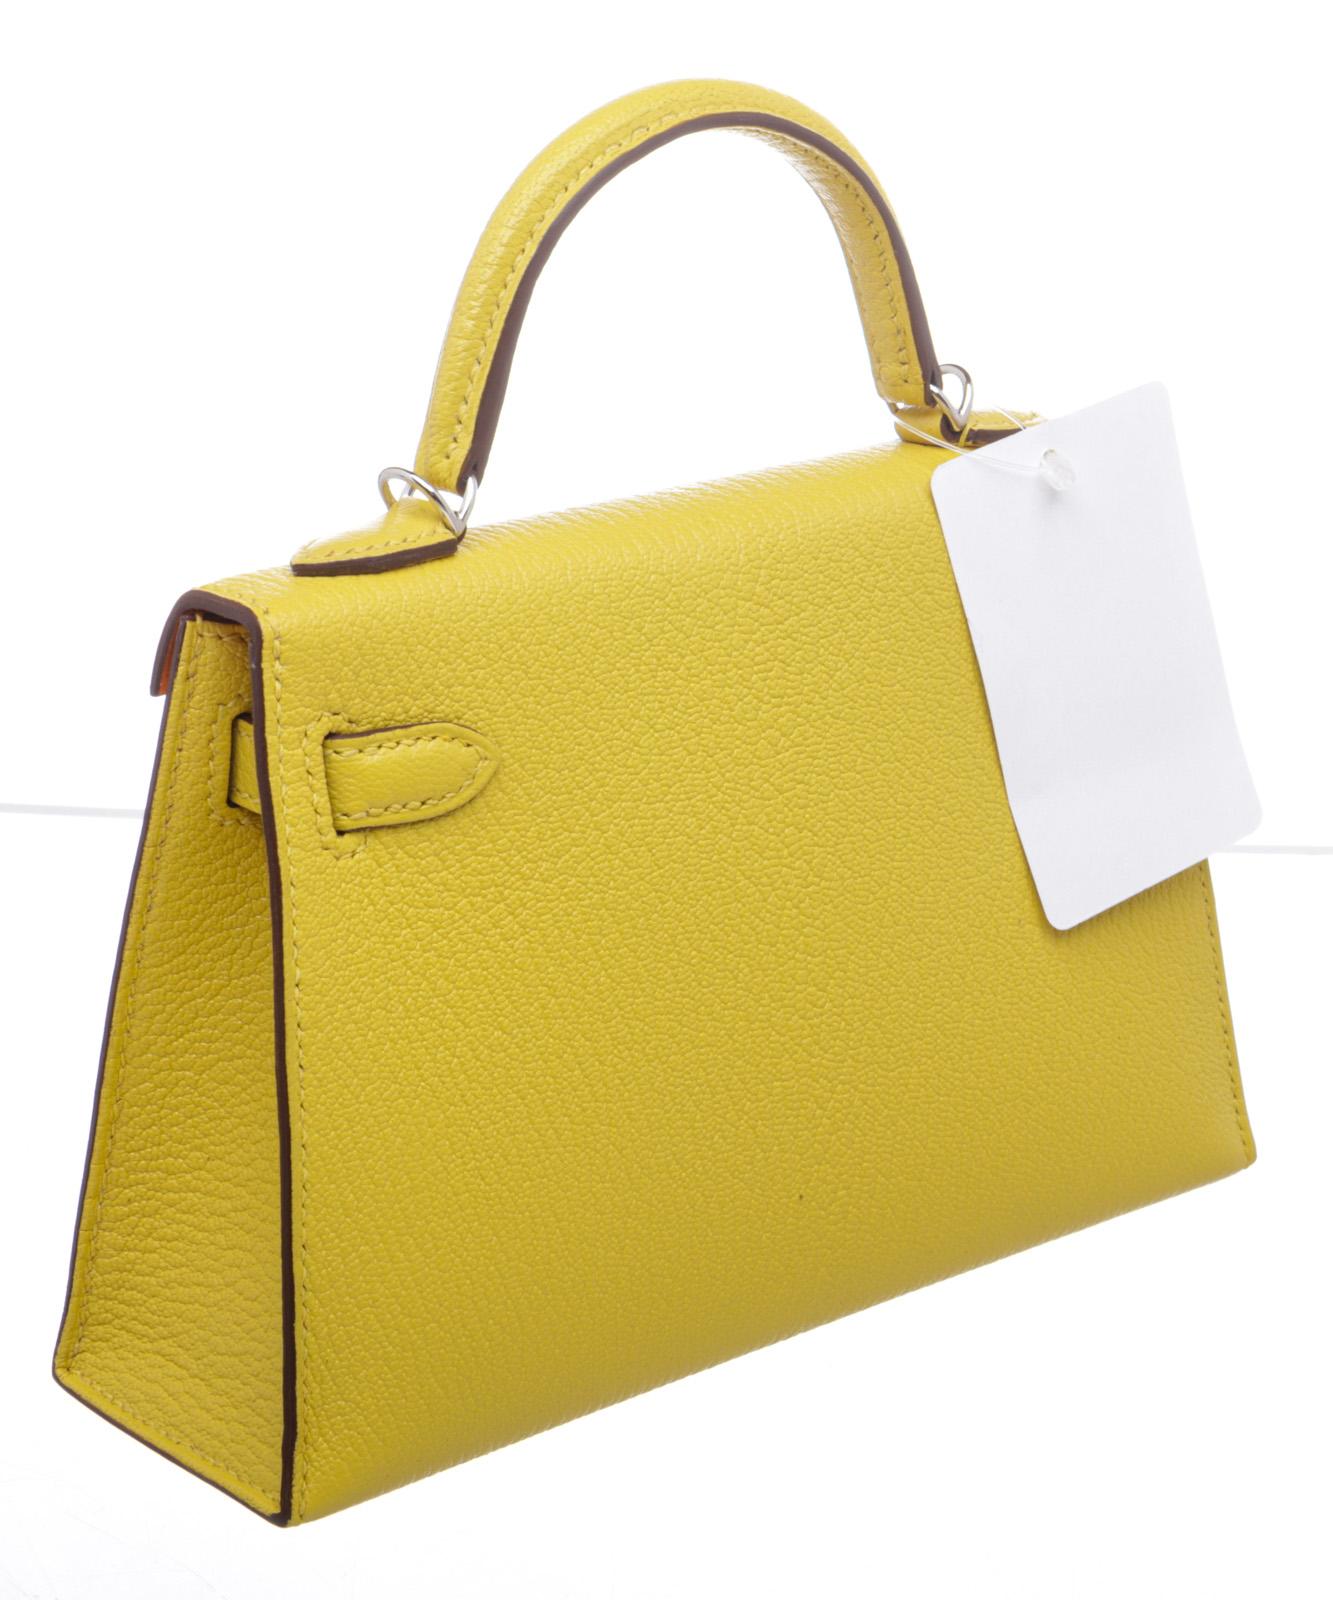 Hermes Yellow Chevre Leather Mini Kelly Sellier 20cm Bag In New Condition For Sale In Corona Del Mar, CA